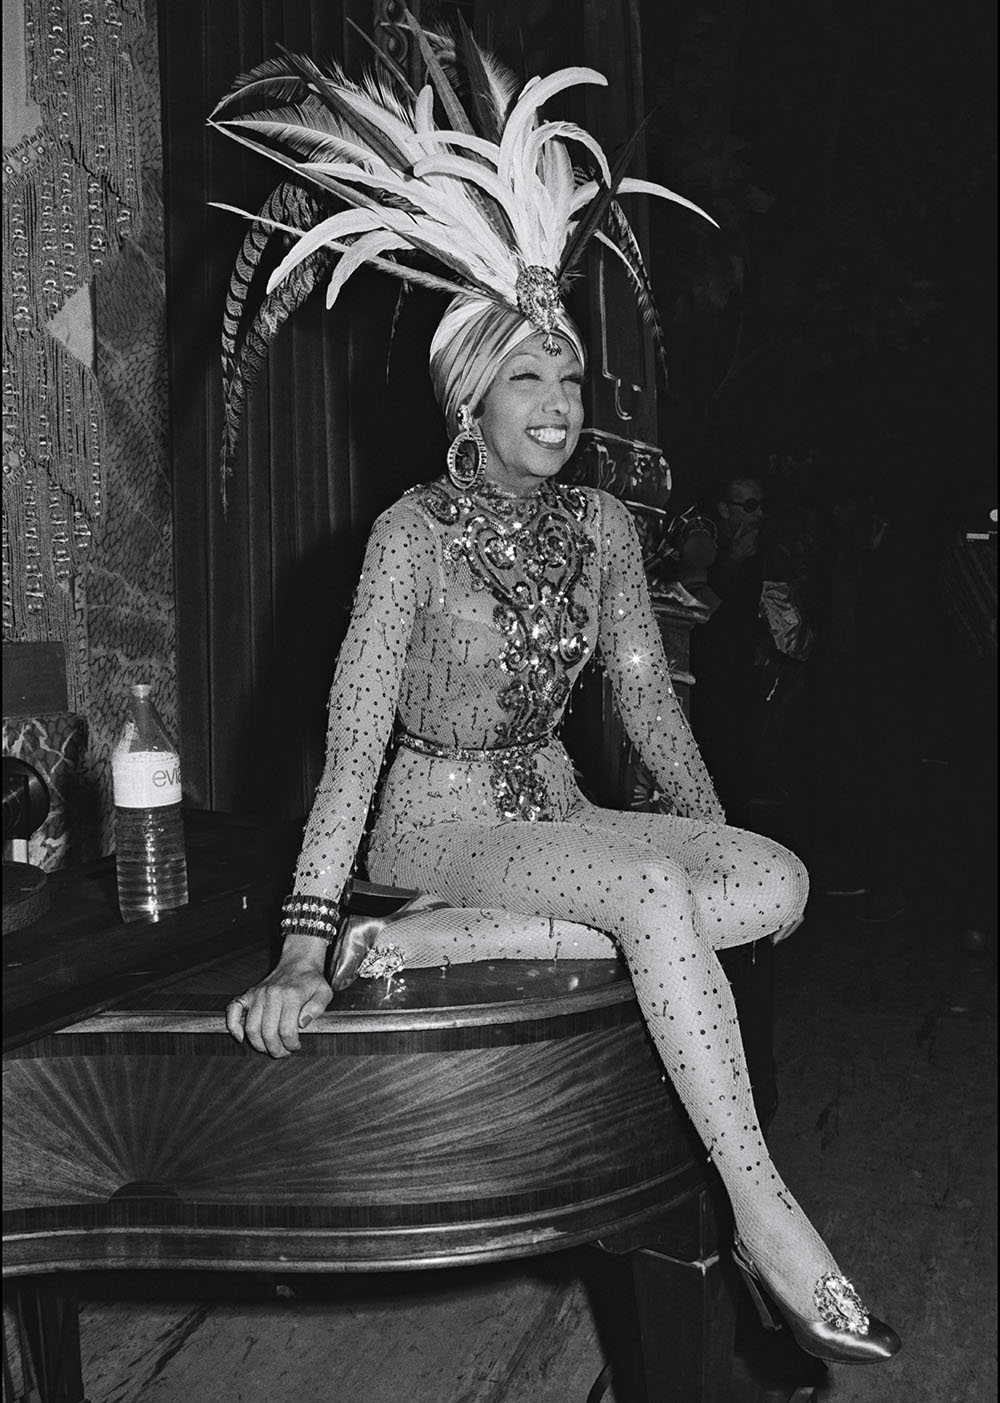 An American in Paris, Josephine Baker was a nightclub performer who moved with a crowd of creatives. And her costumes were as famous as her moves - her banana shaped skirt inspired a Prada collection, and her sheer crystal dresses were said to be an inspiration for Rihanna’s see-through, sparkly dress at the CFDA. She also owned a pet cheetah named Chiquita.